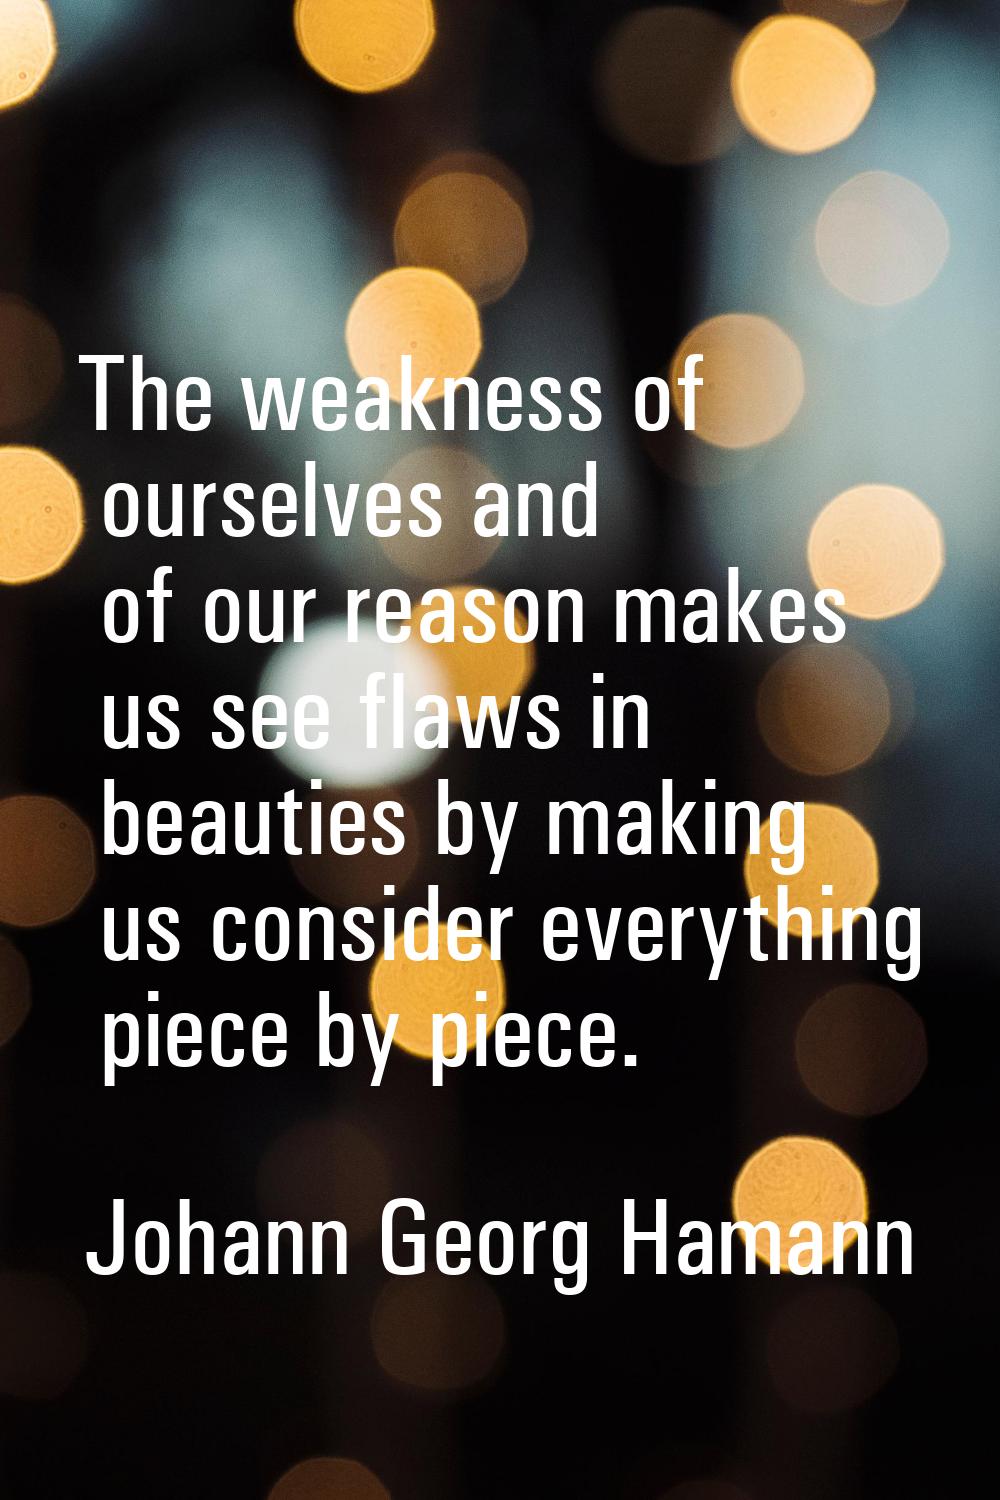 The weakness of ourselves and of our reason makes us see flaws in beauties by making us consider ev